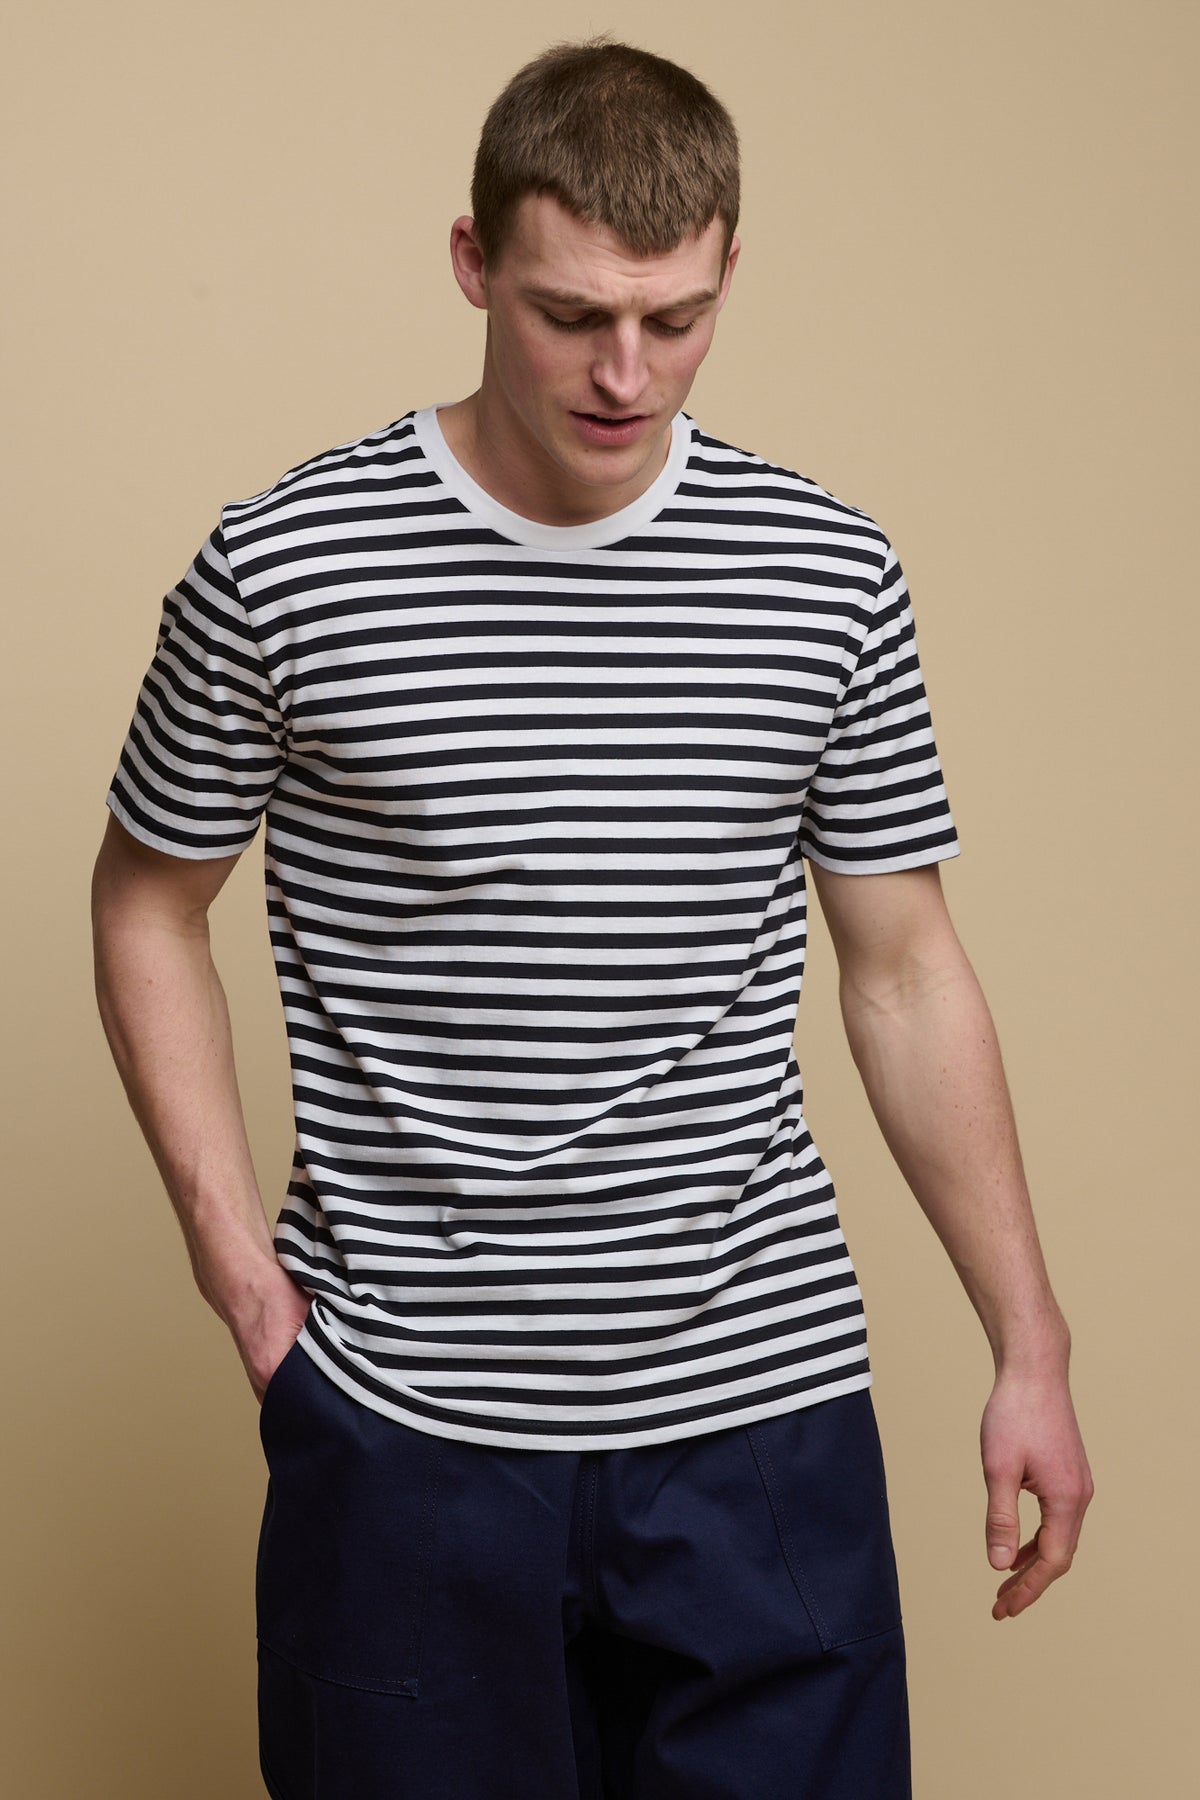 
            Thigh up image of brunet male wearing short sleeve stripe t shirt in navy white